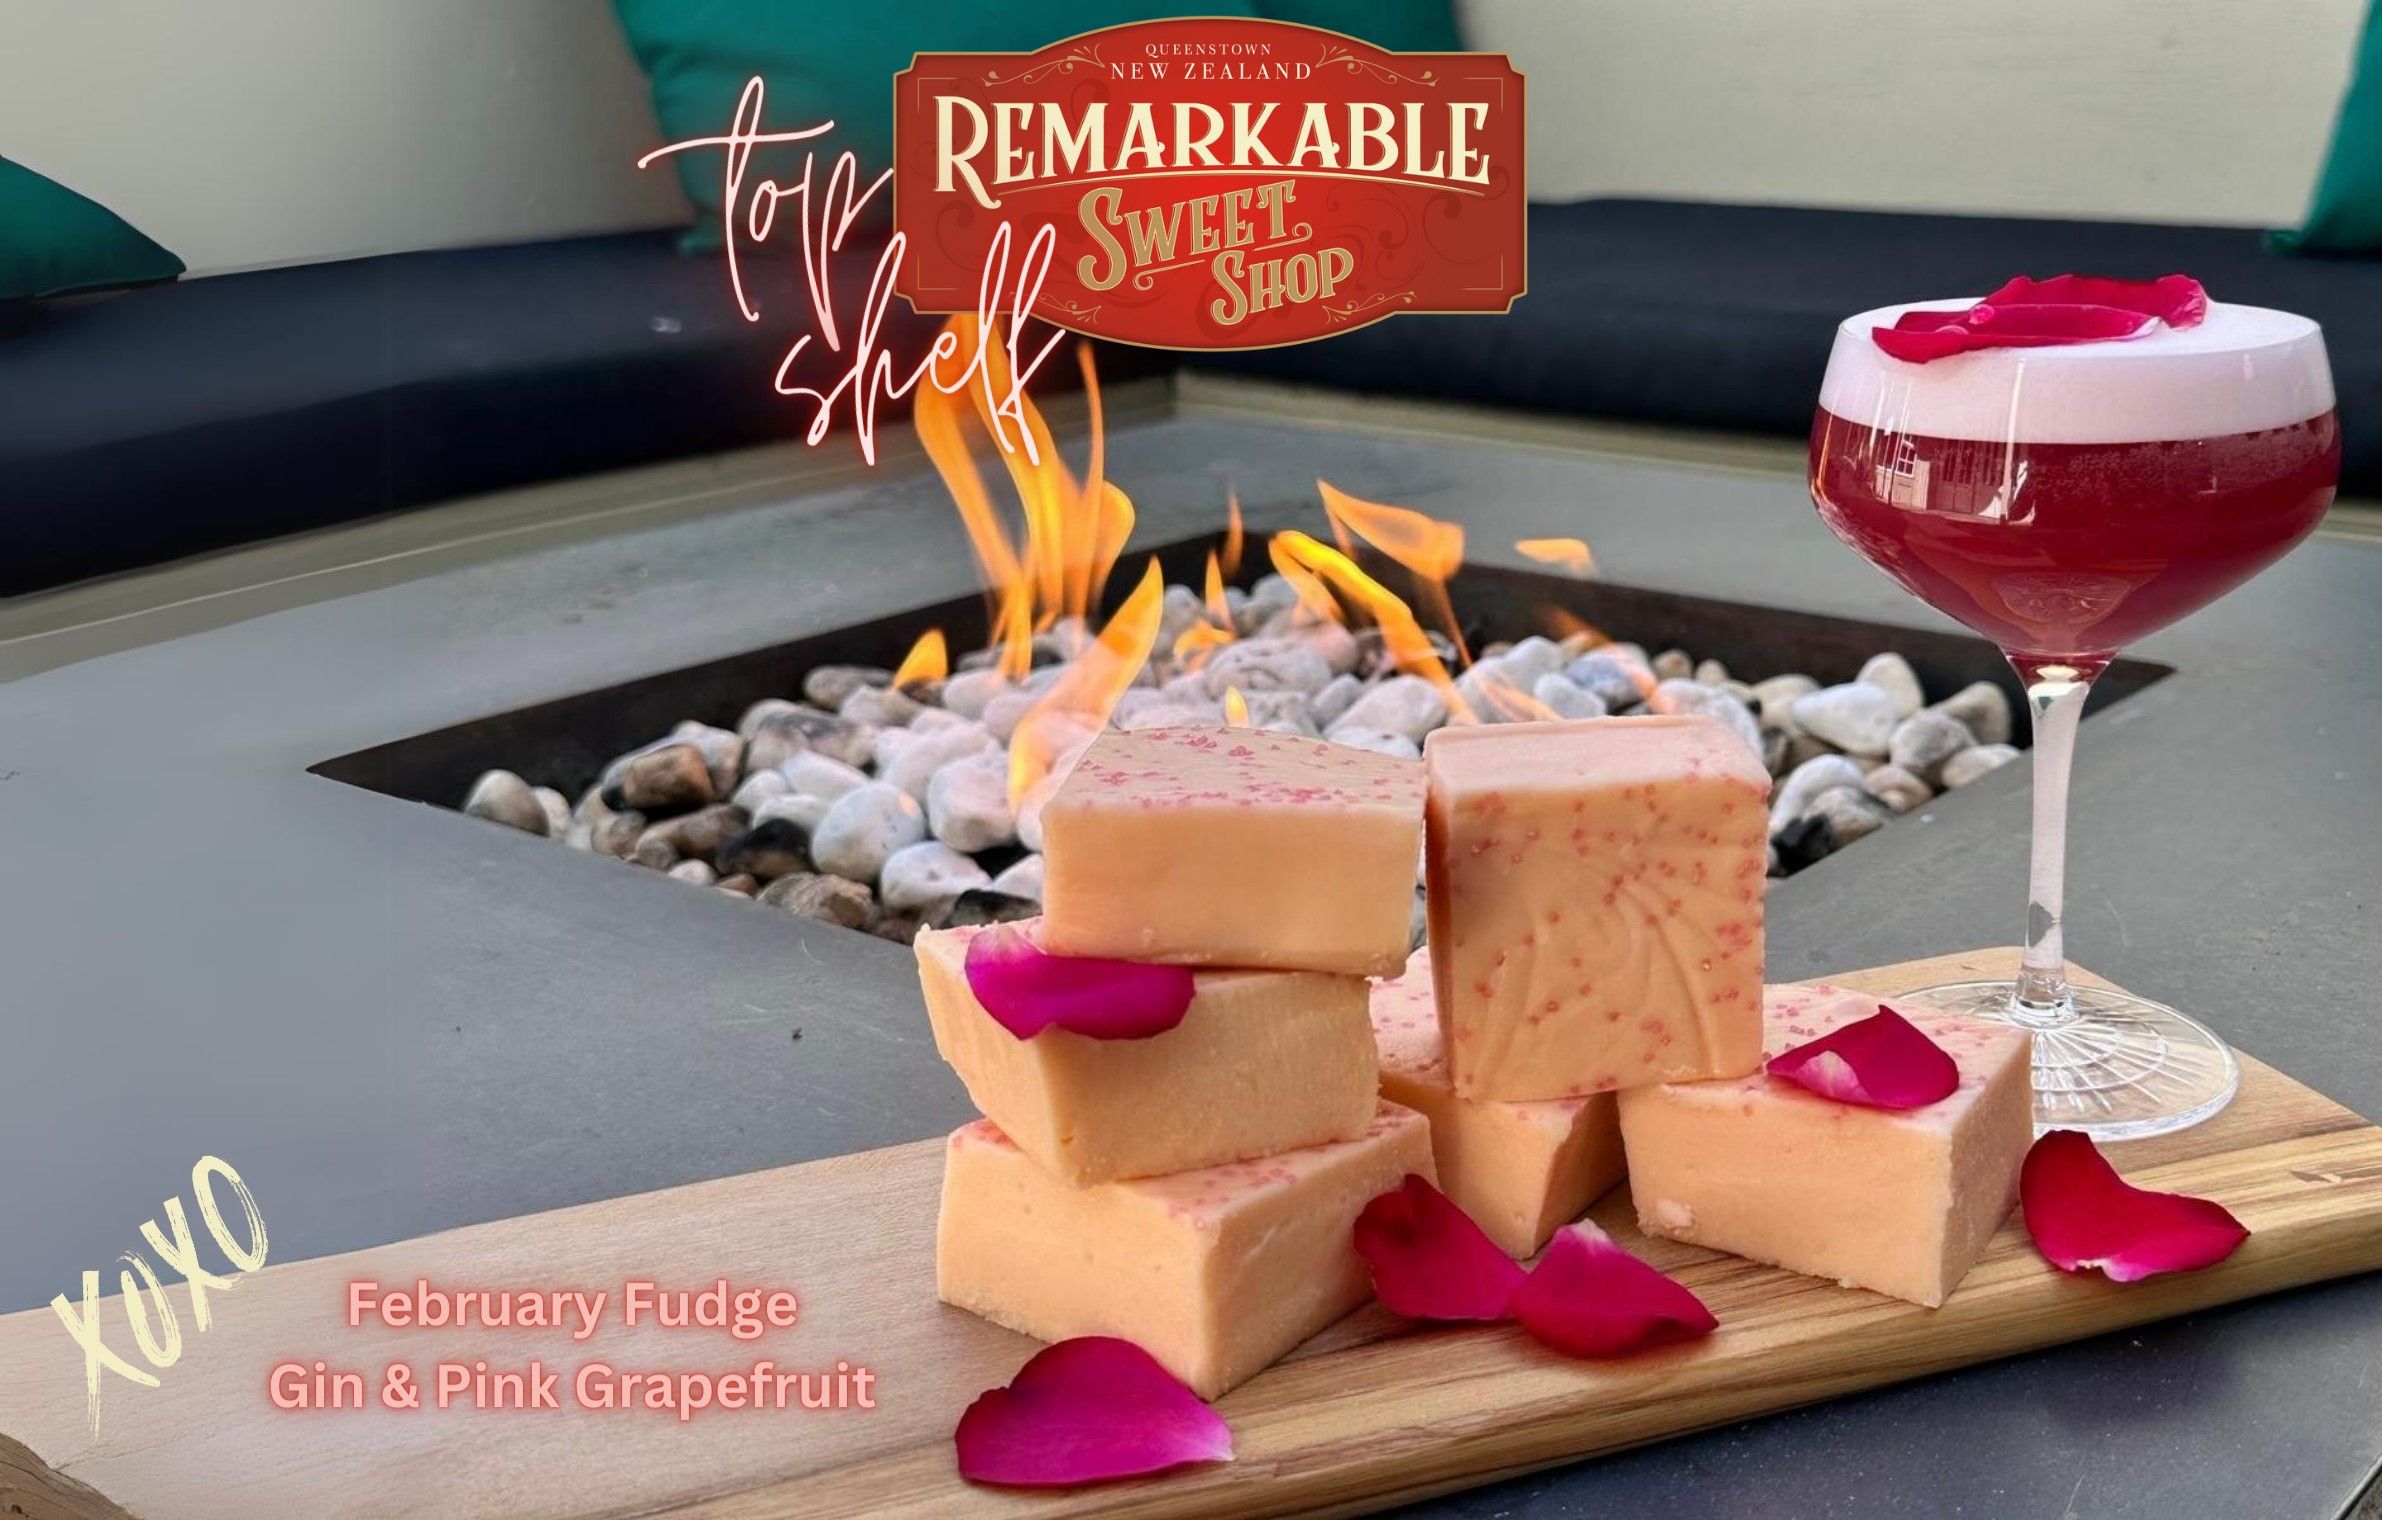 https://www.remarkablesweetshop.co.nz/product/9520-gin-and-pink-grapefruit-fudge